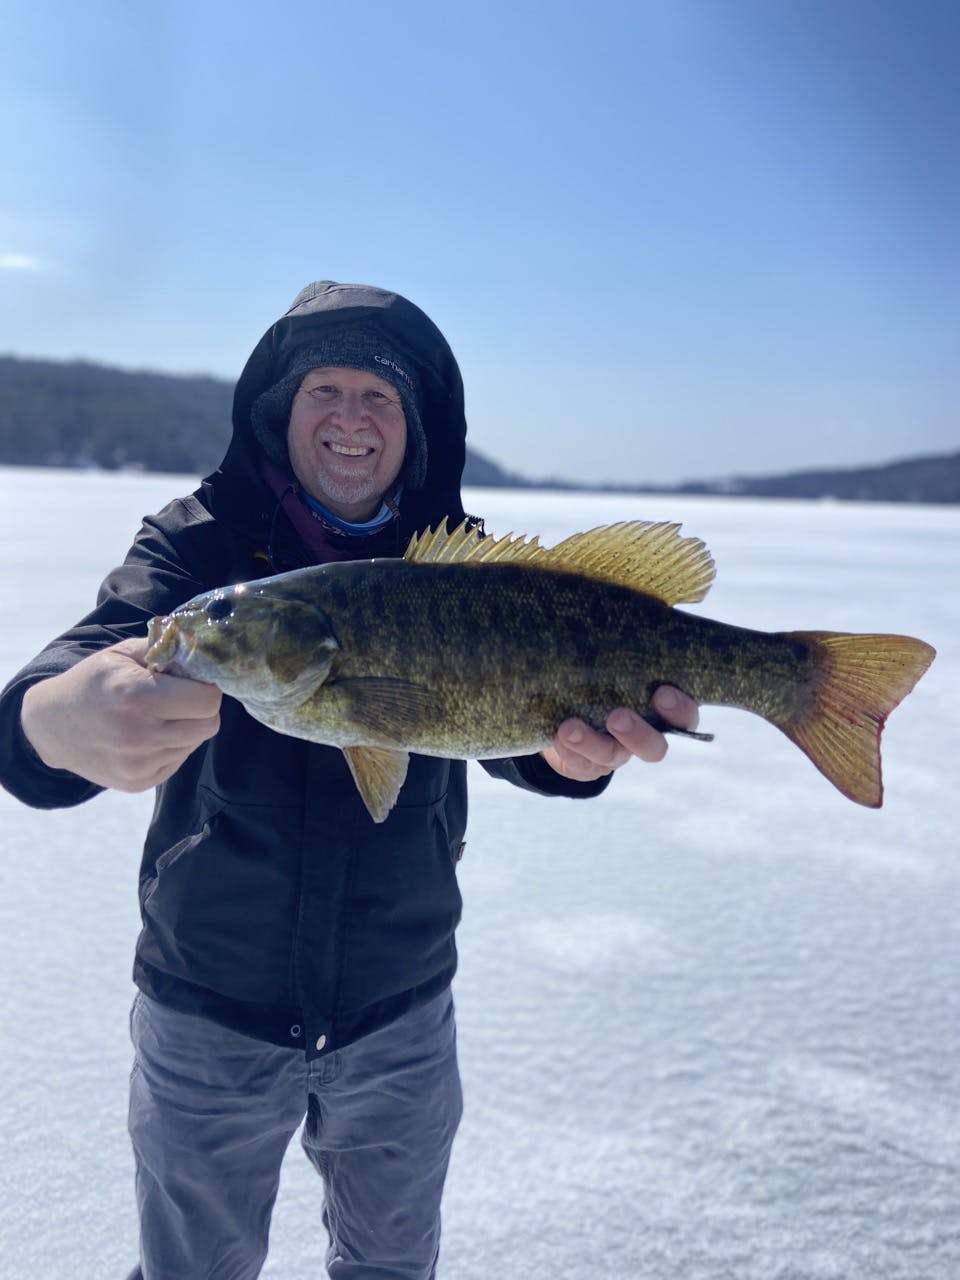 middle-aged man standing on a frozen lake, wearing a winter green jacket with hood up, smiling, and holding a fish horizontally